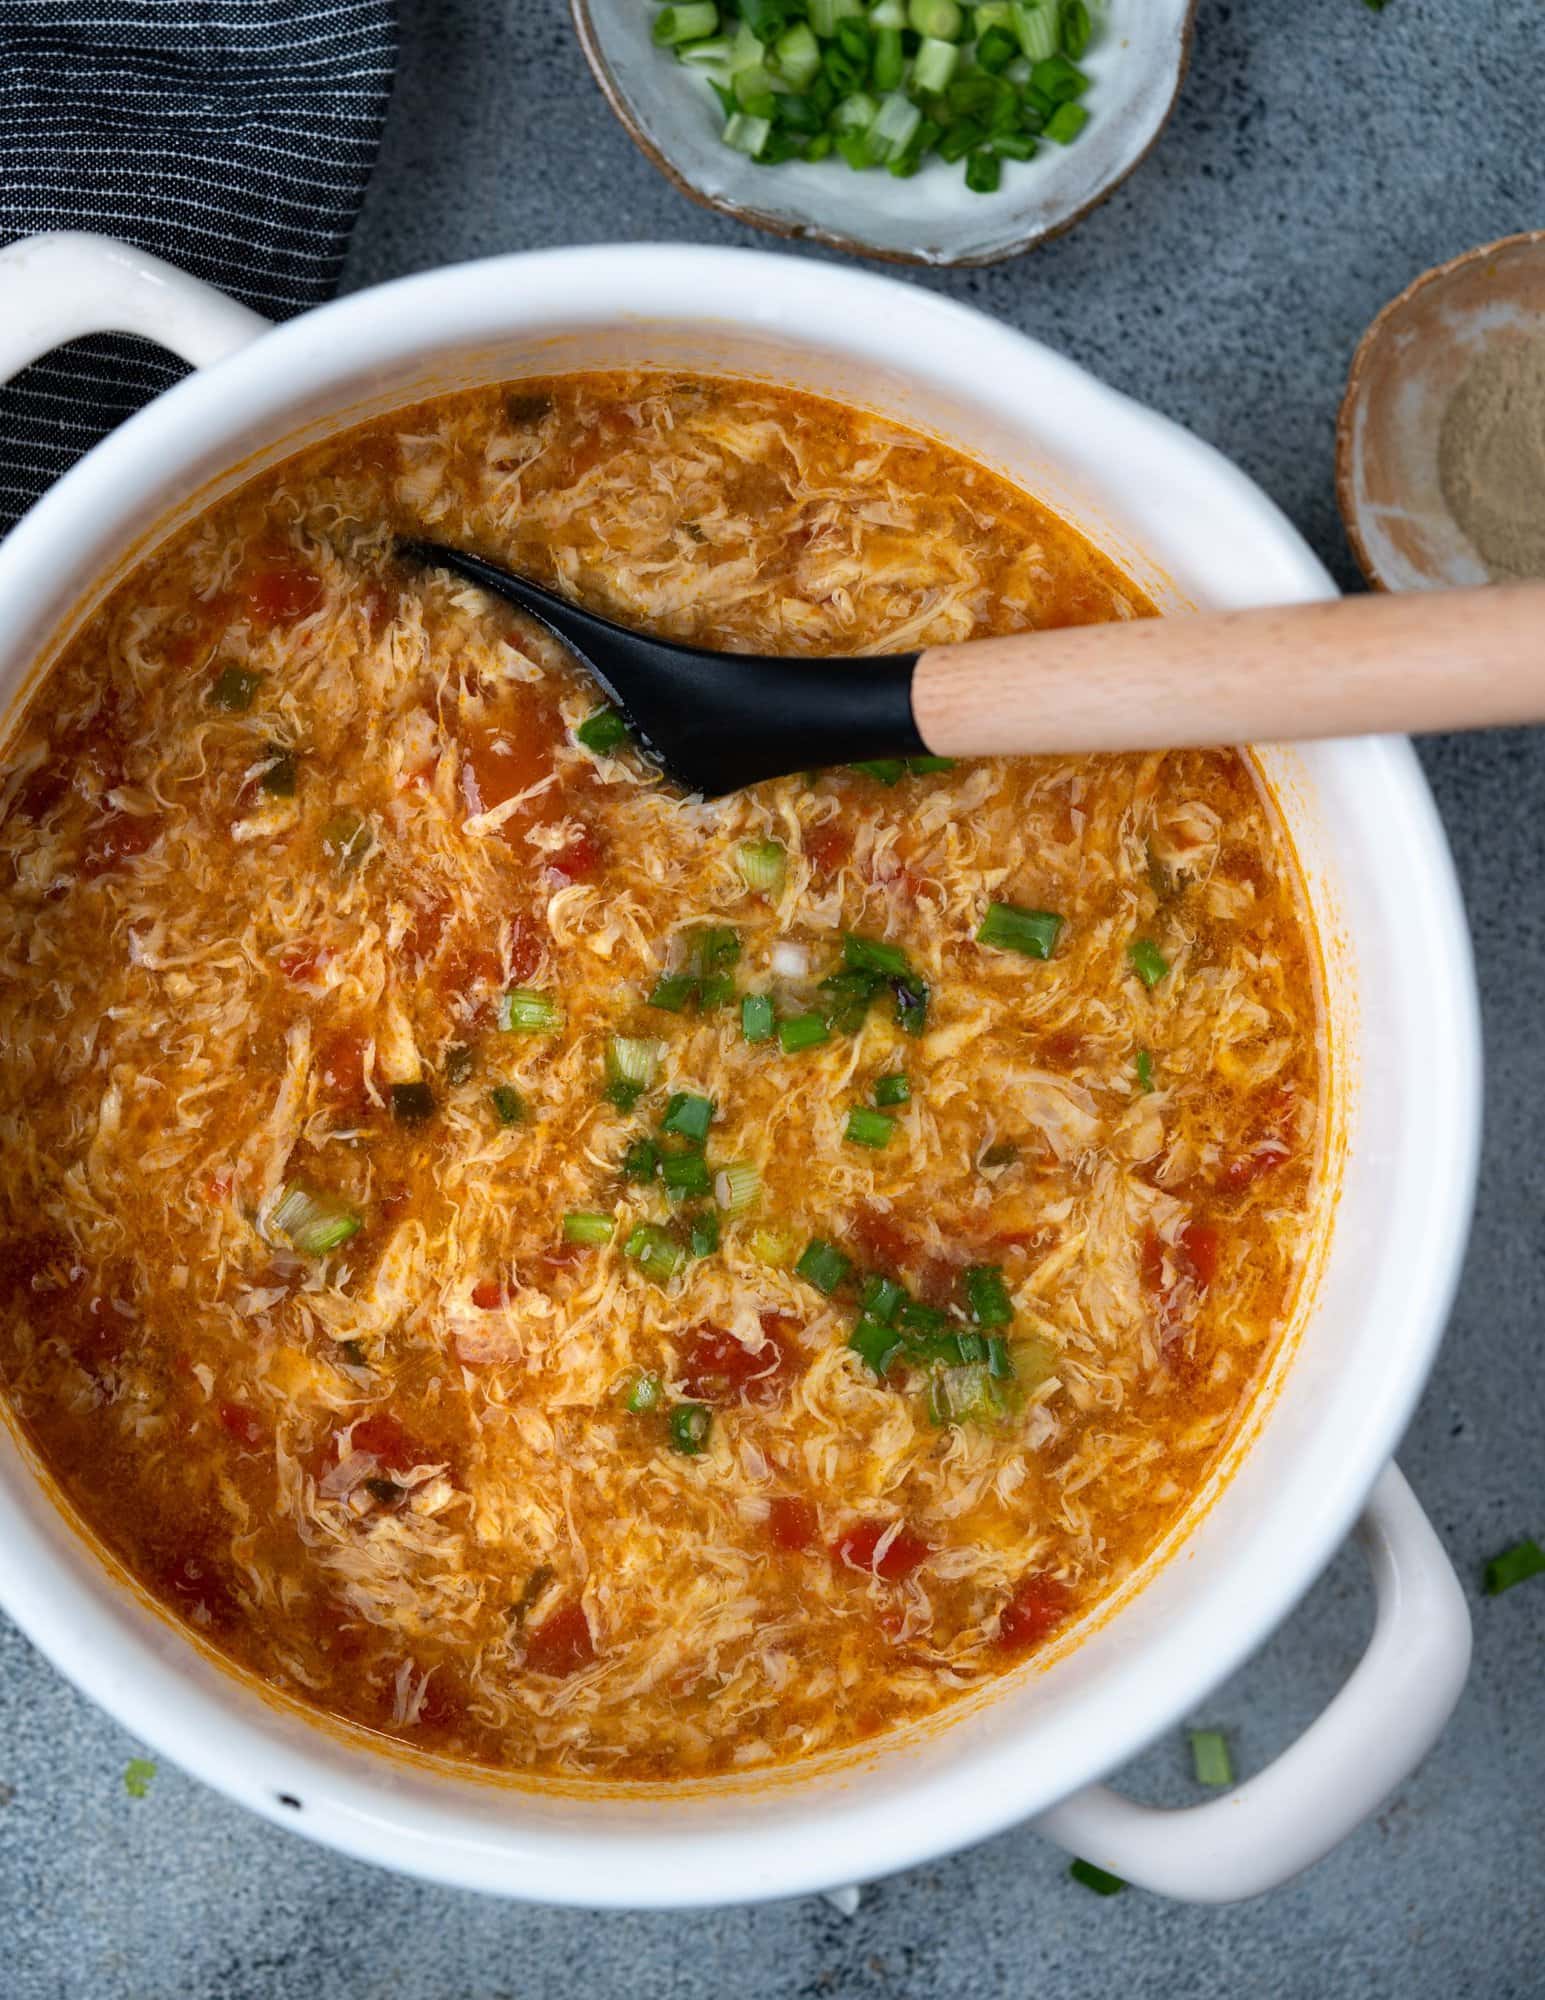 Tomato Egg drop soup is a variation of the classic Chinese Egg drop soup. Tangy tomatoes give an interesting twist to this quick 15 minutes soup, made with a handful of pantry staples.